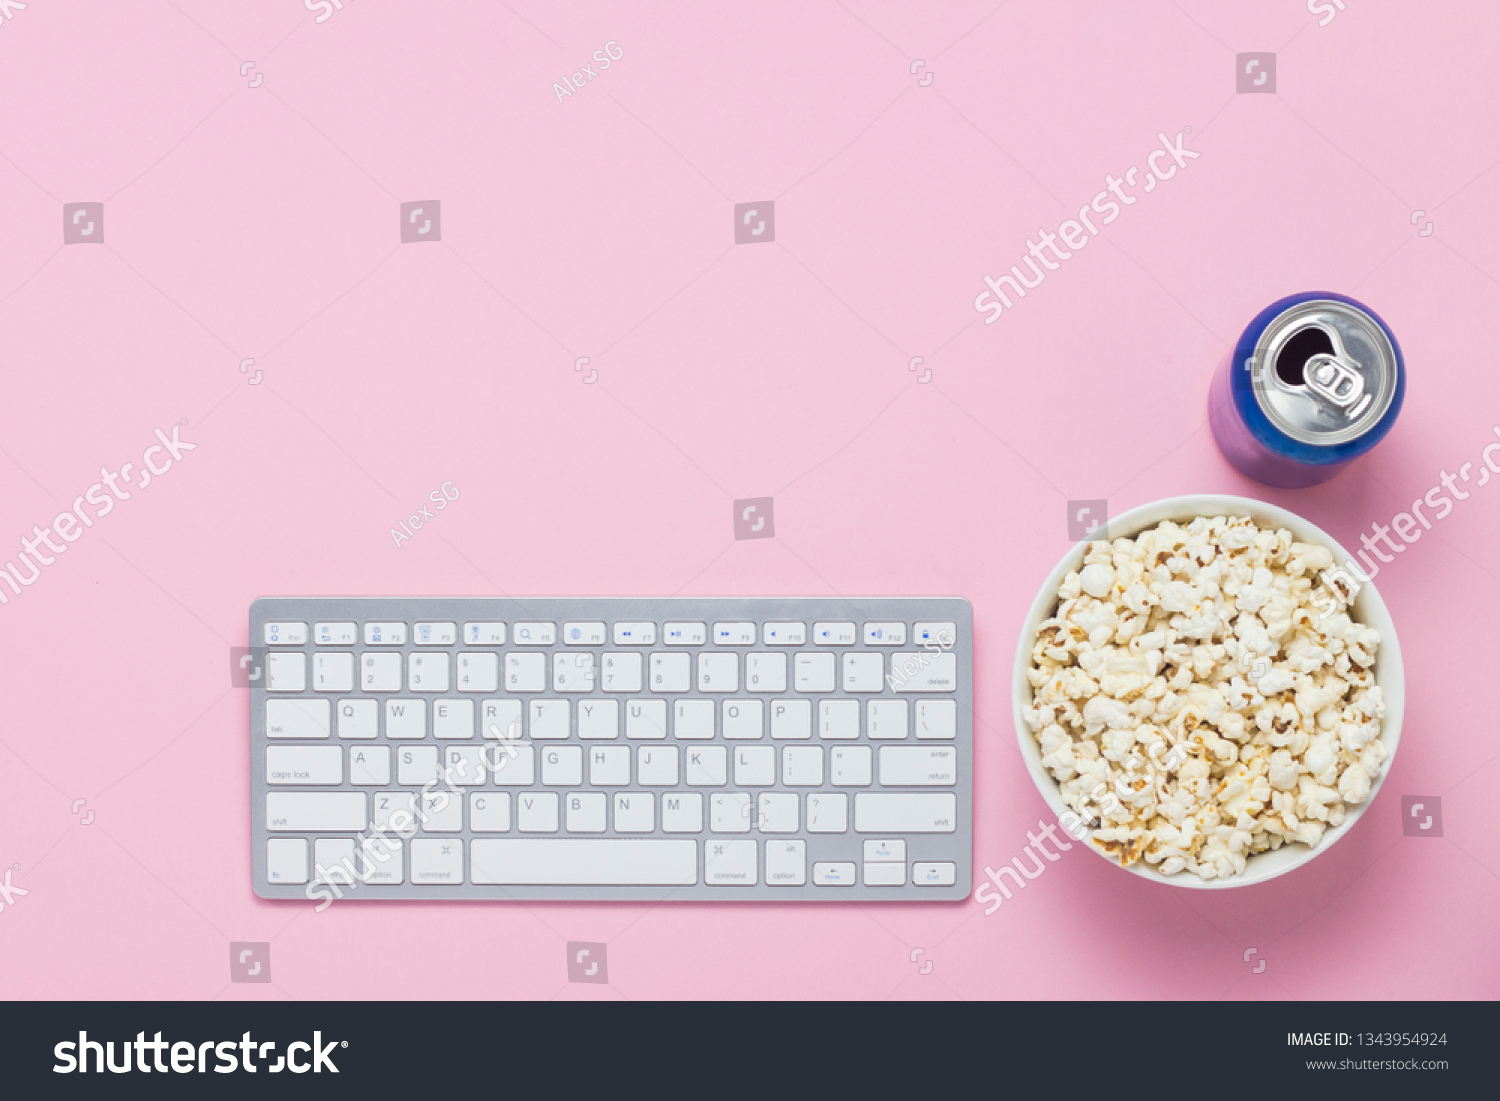 Keyboard, can with a drink and a bowl of popcorn on a pink background. The concept of watching movies, TV shows and shows online. Flat lay, top view. #1343954924